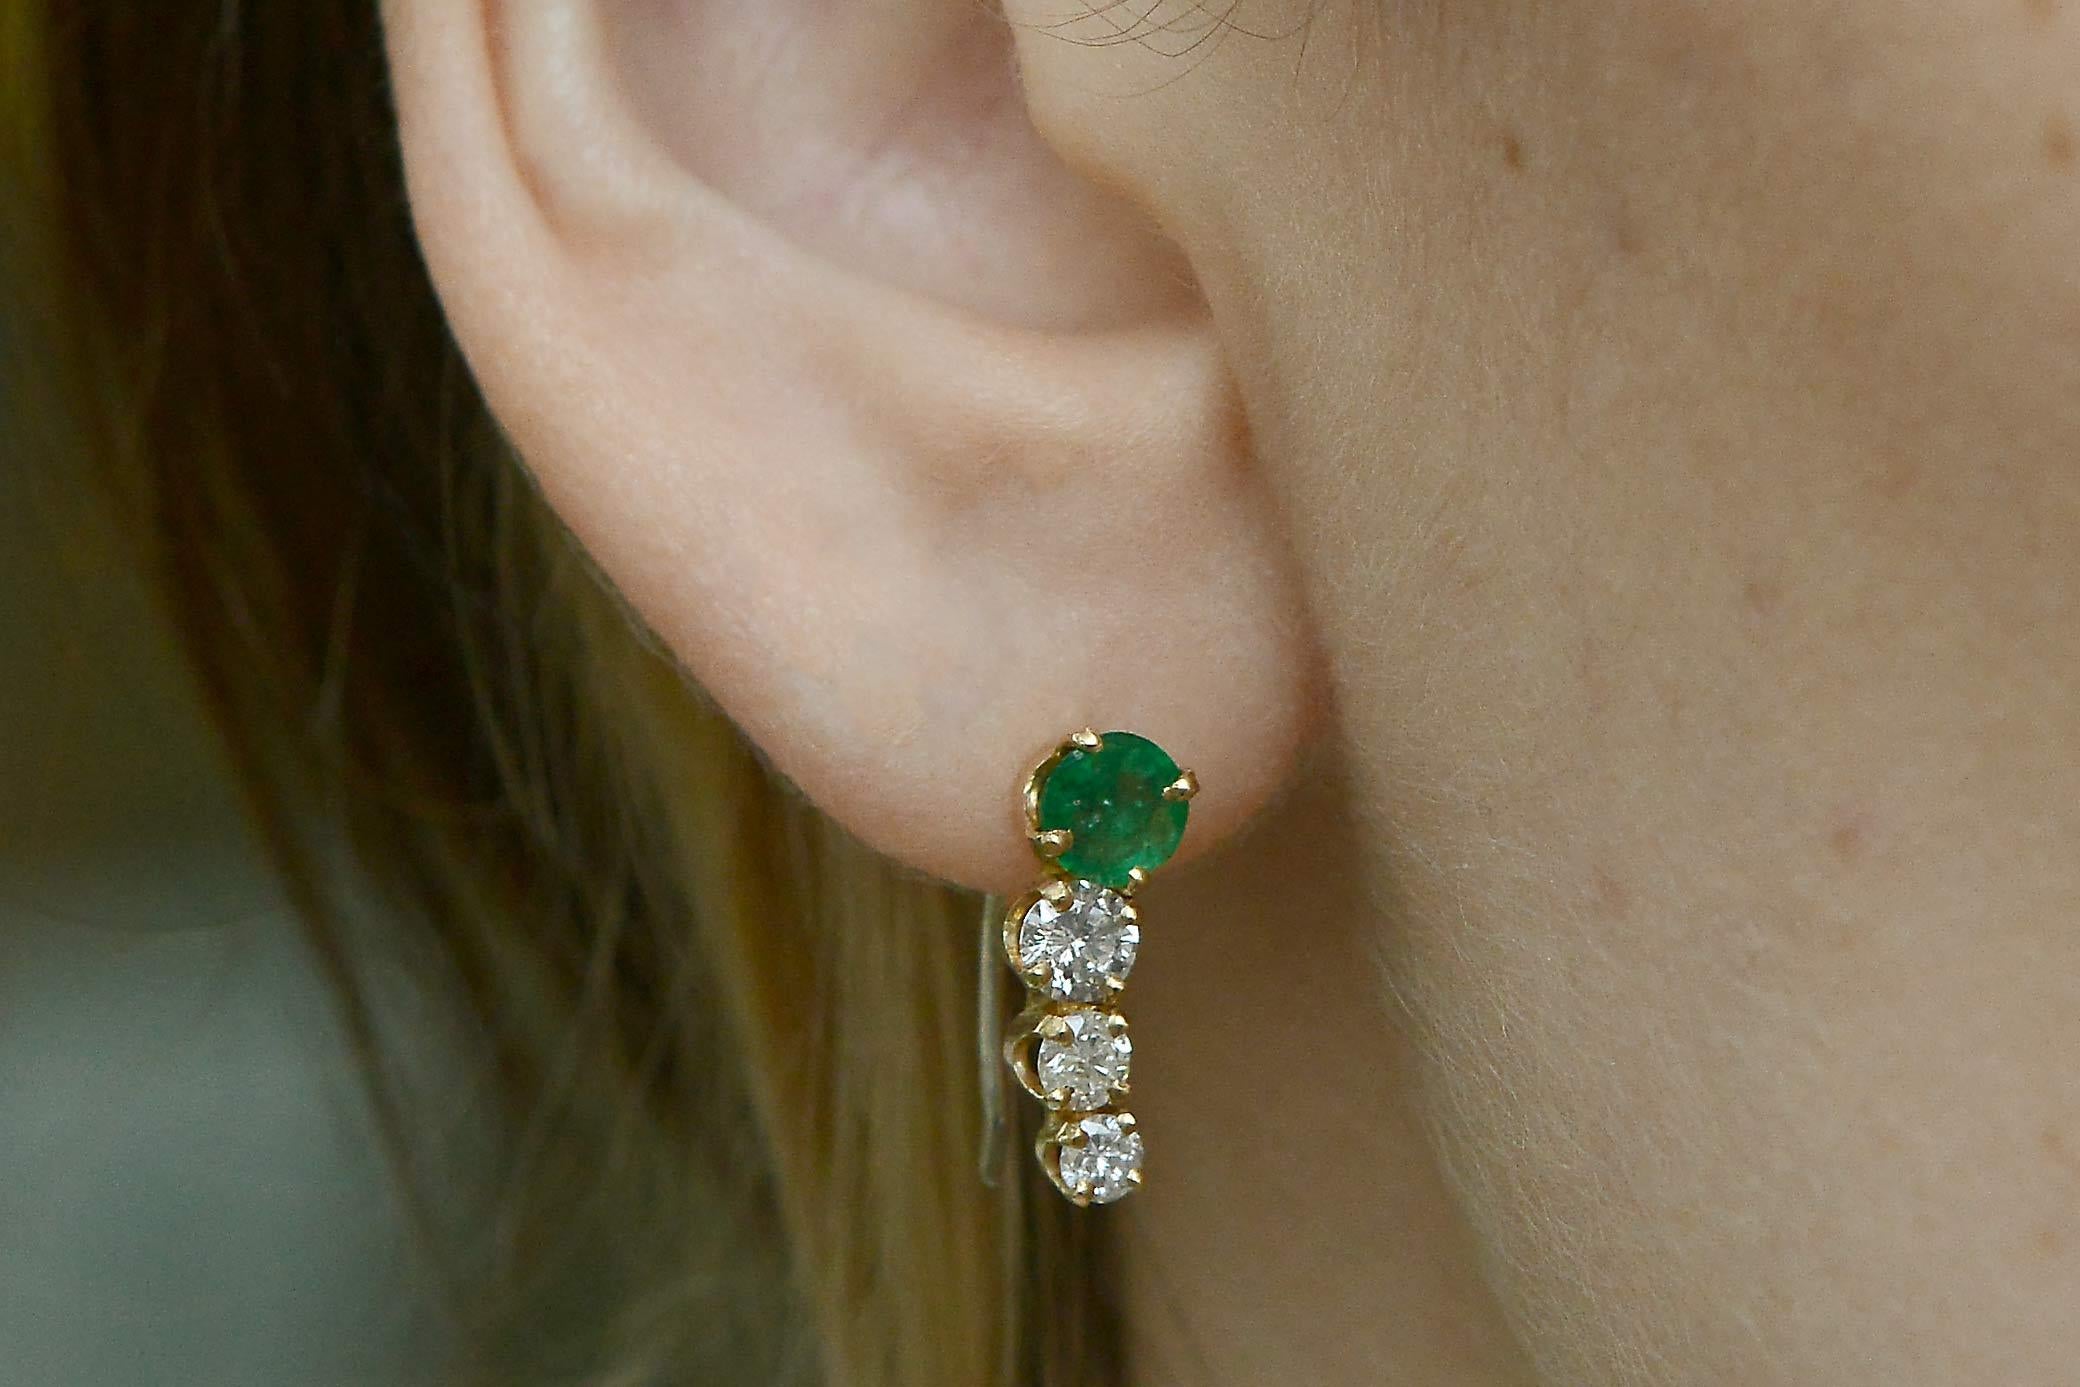 A sensational pair of emerald and diamond waterfall earrings. Situated on top are a set of gorgeous matched emeralds displaying a luscious green. Cascading down are a triplet of gleaming diamonds descending in size, all set in 14kt yellow gold.